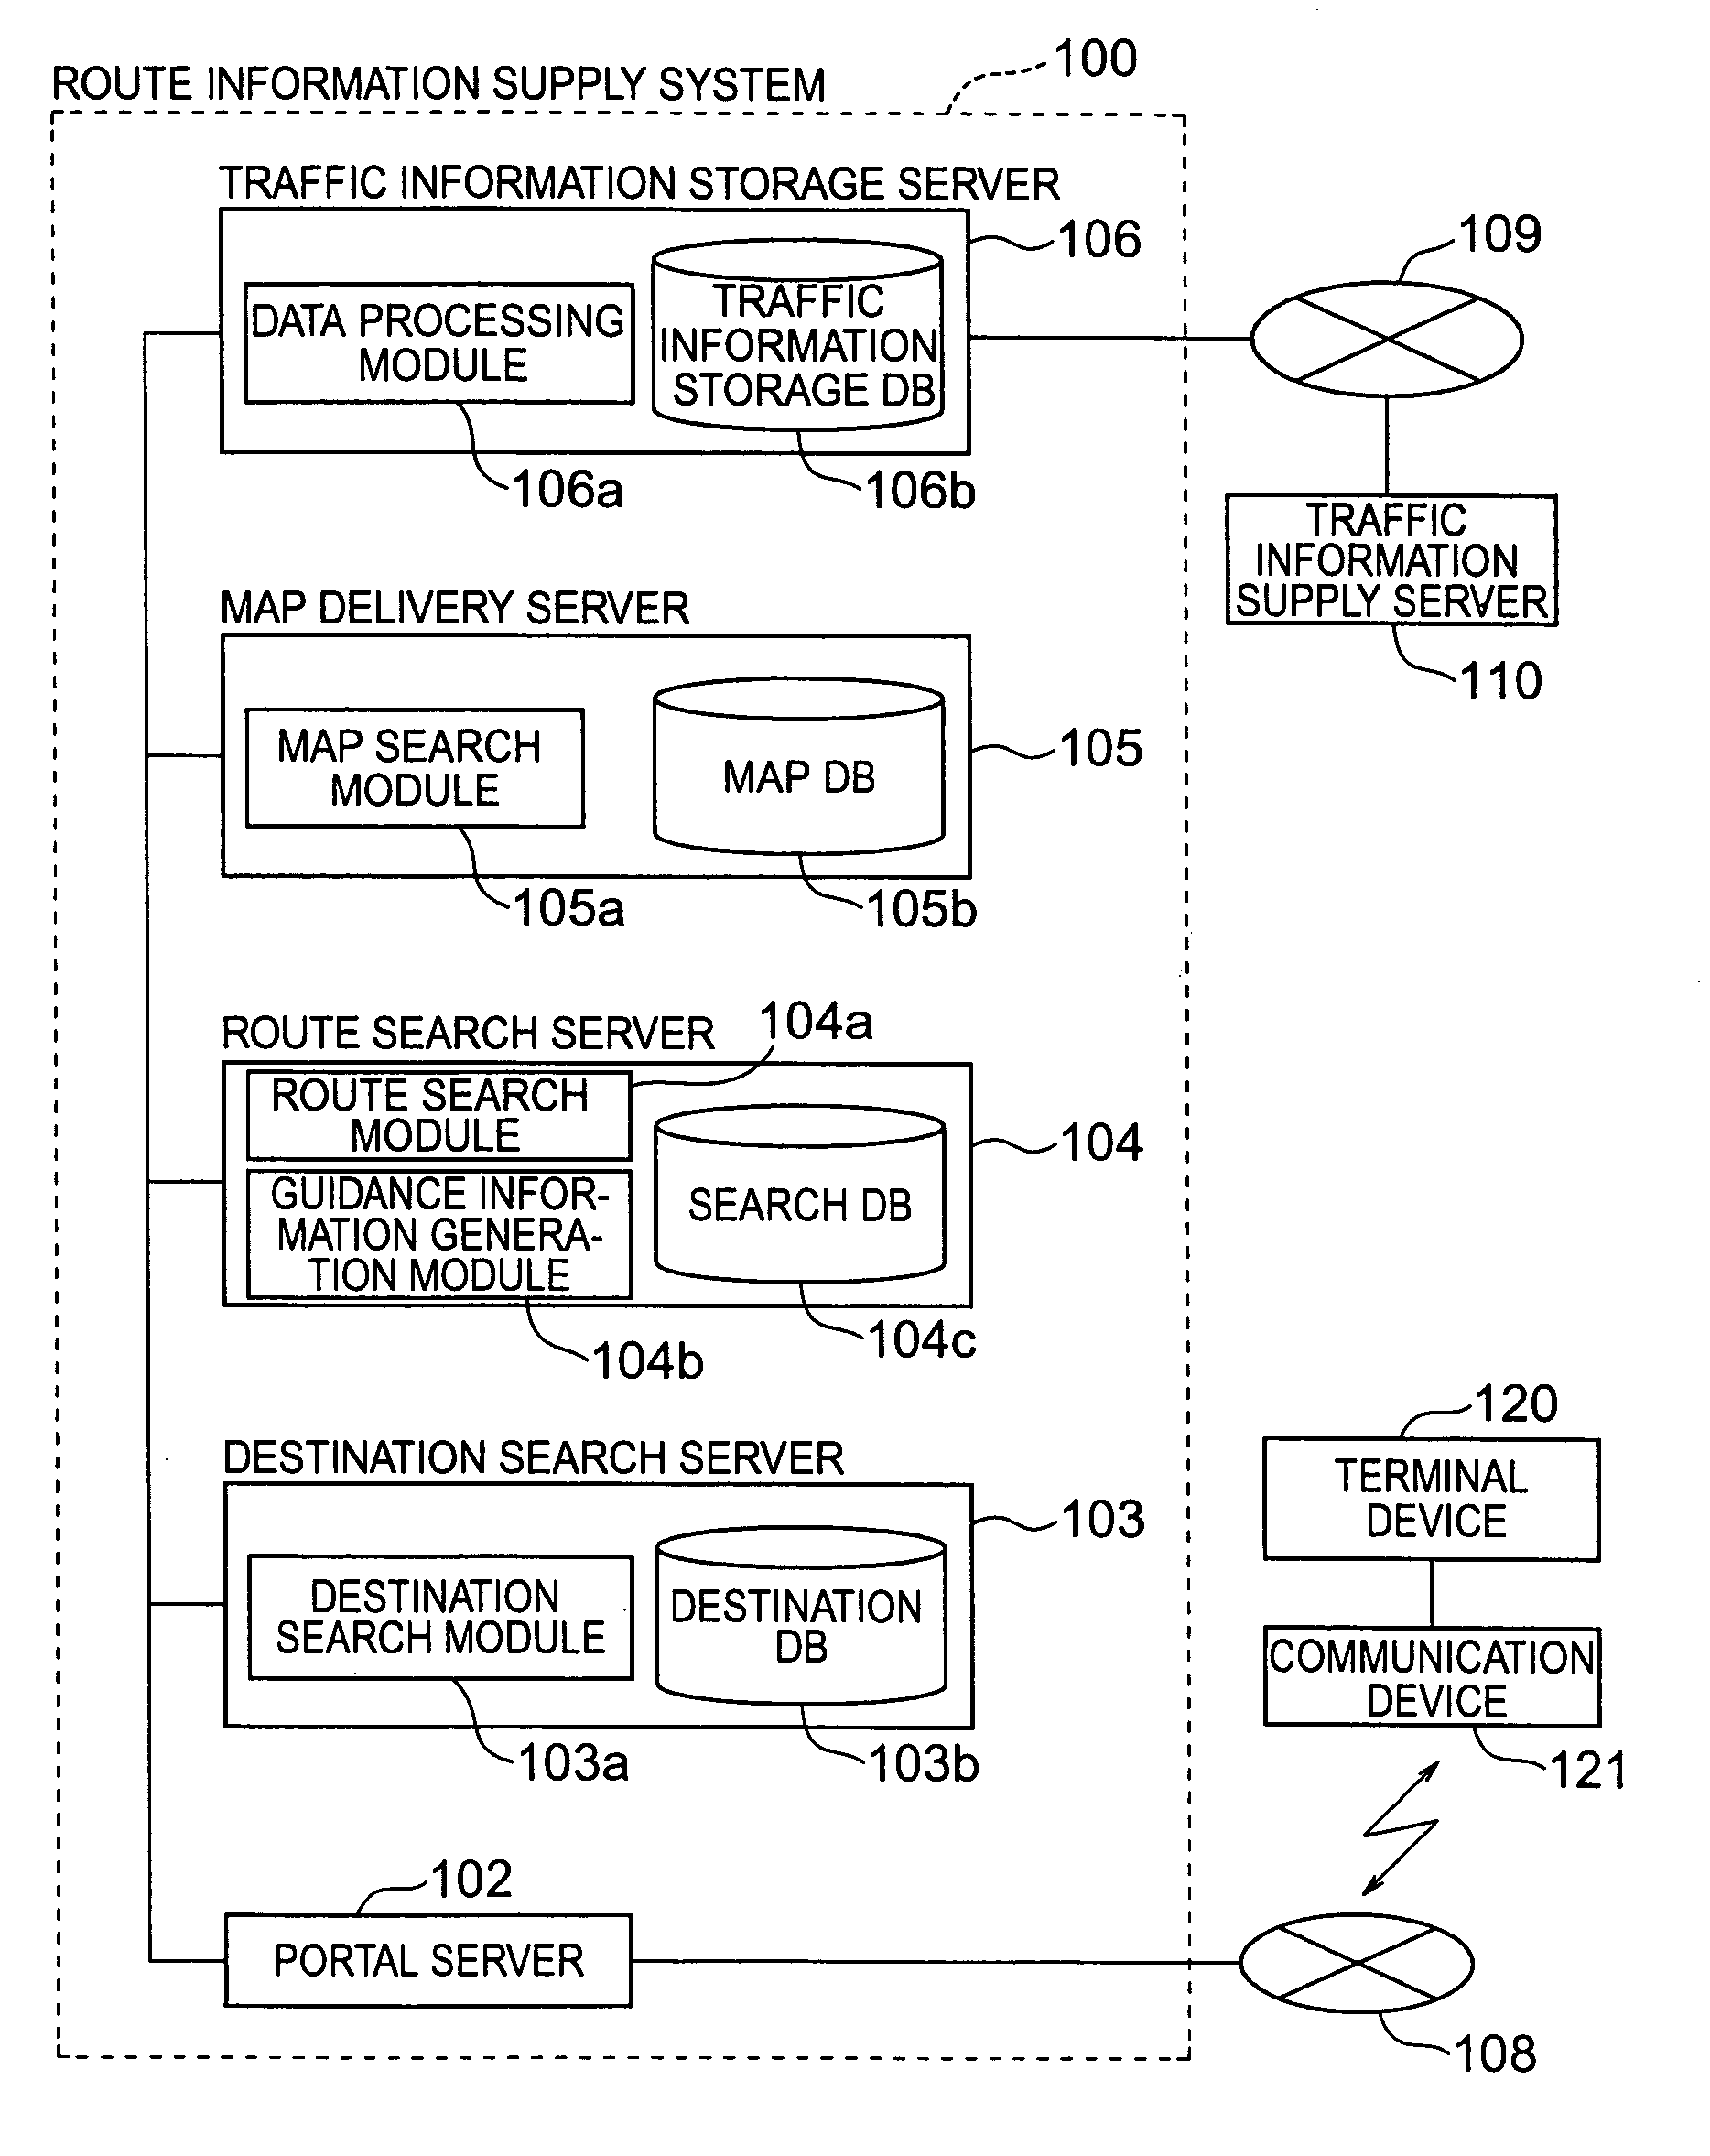 Method and apparatus for communicating map and route guidance information for vehicle navigation